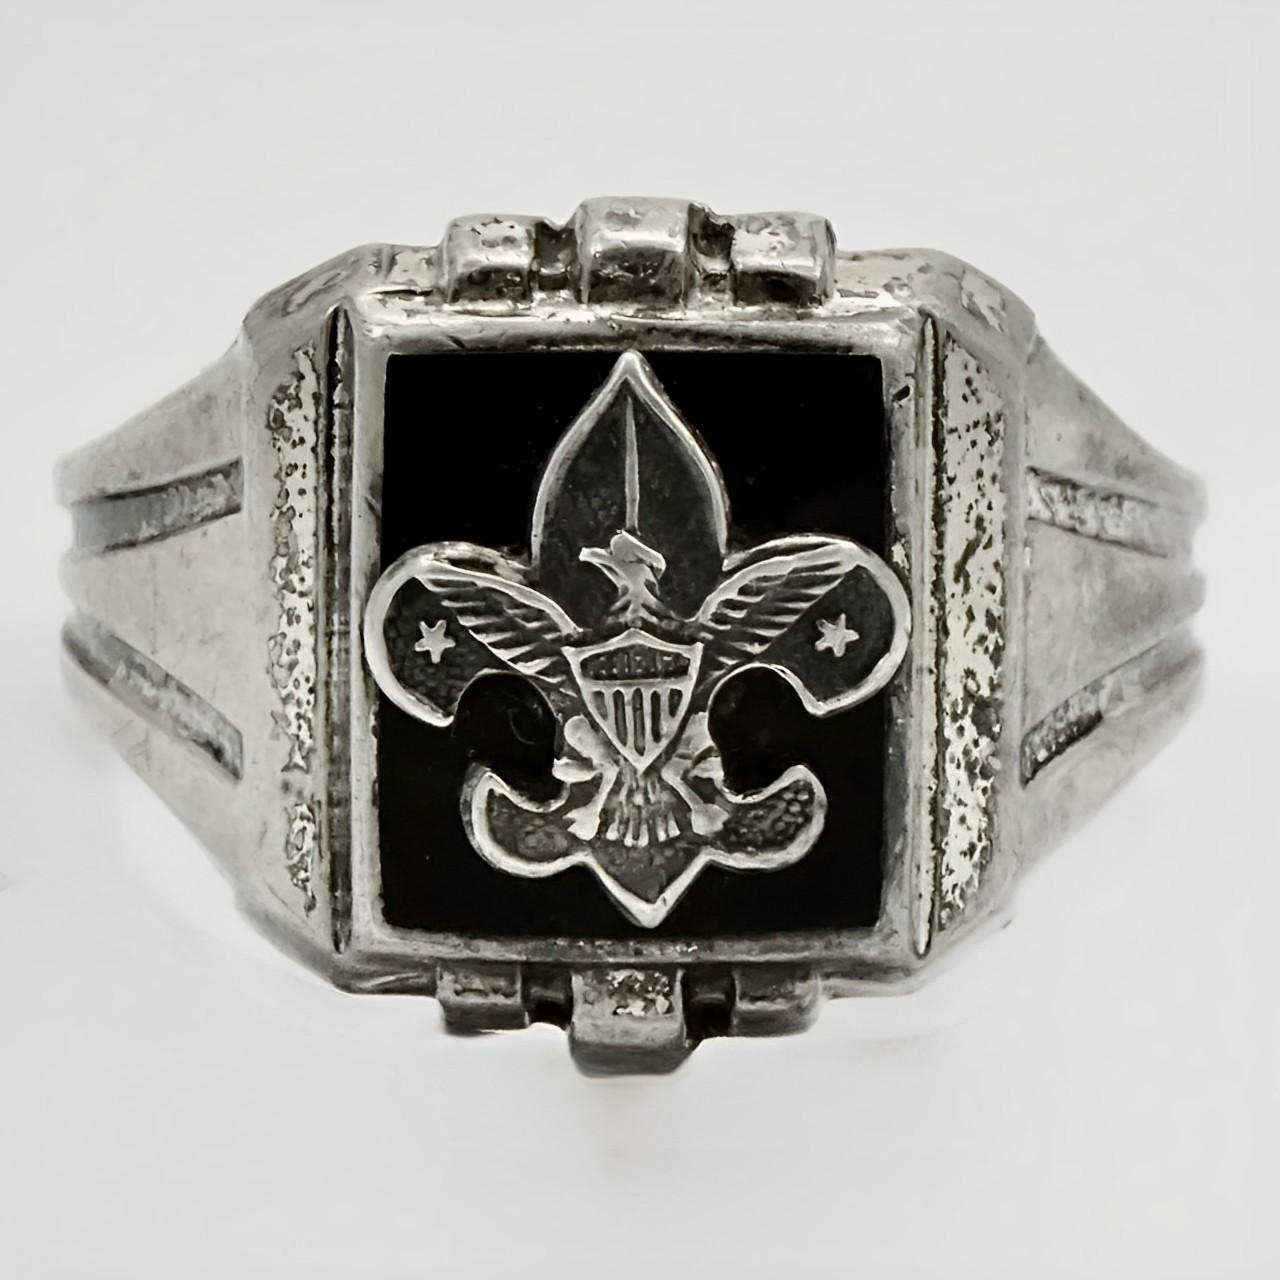 Wonderful sterling silver ring in a classic Art Deco design with the scouts insignia set on an onyx background. Ring size UK U, US 10 1/4, inside diameter 2.15 cm / .8 inch. We have given the ring a light clean.

This is a stylish scounts ring circa